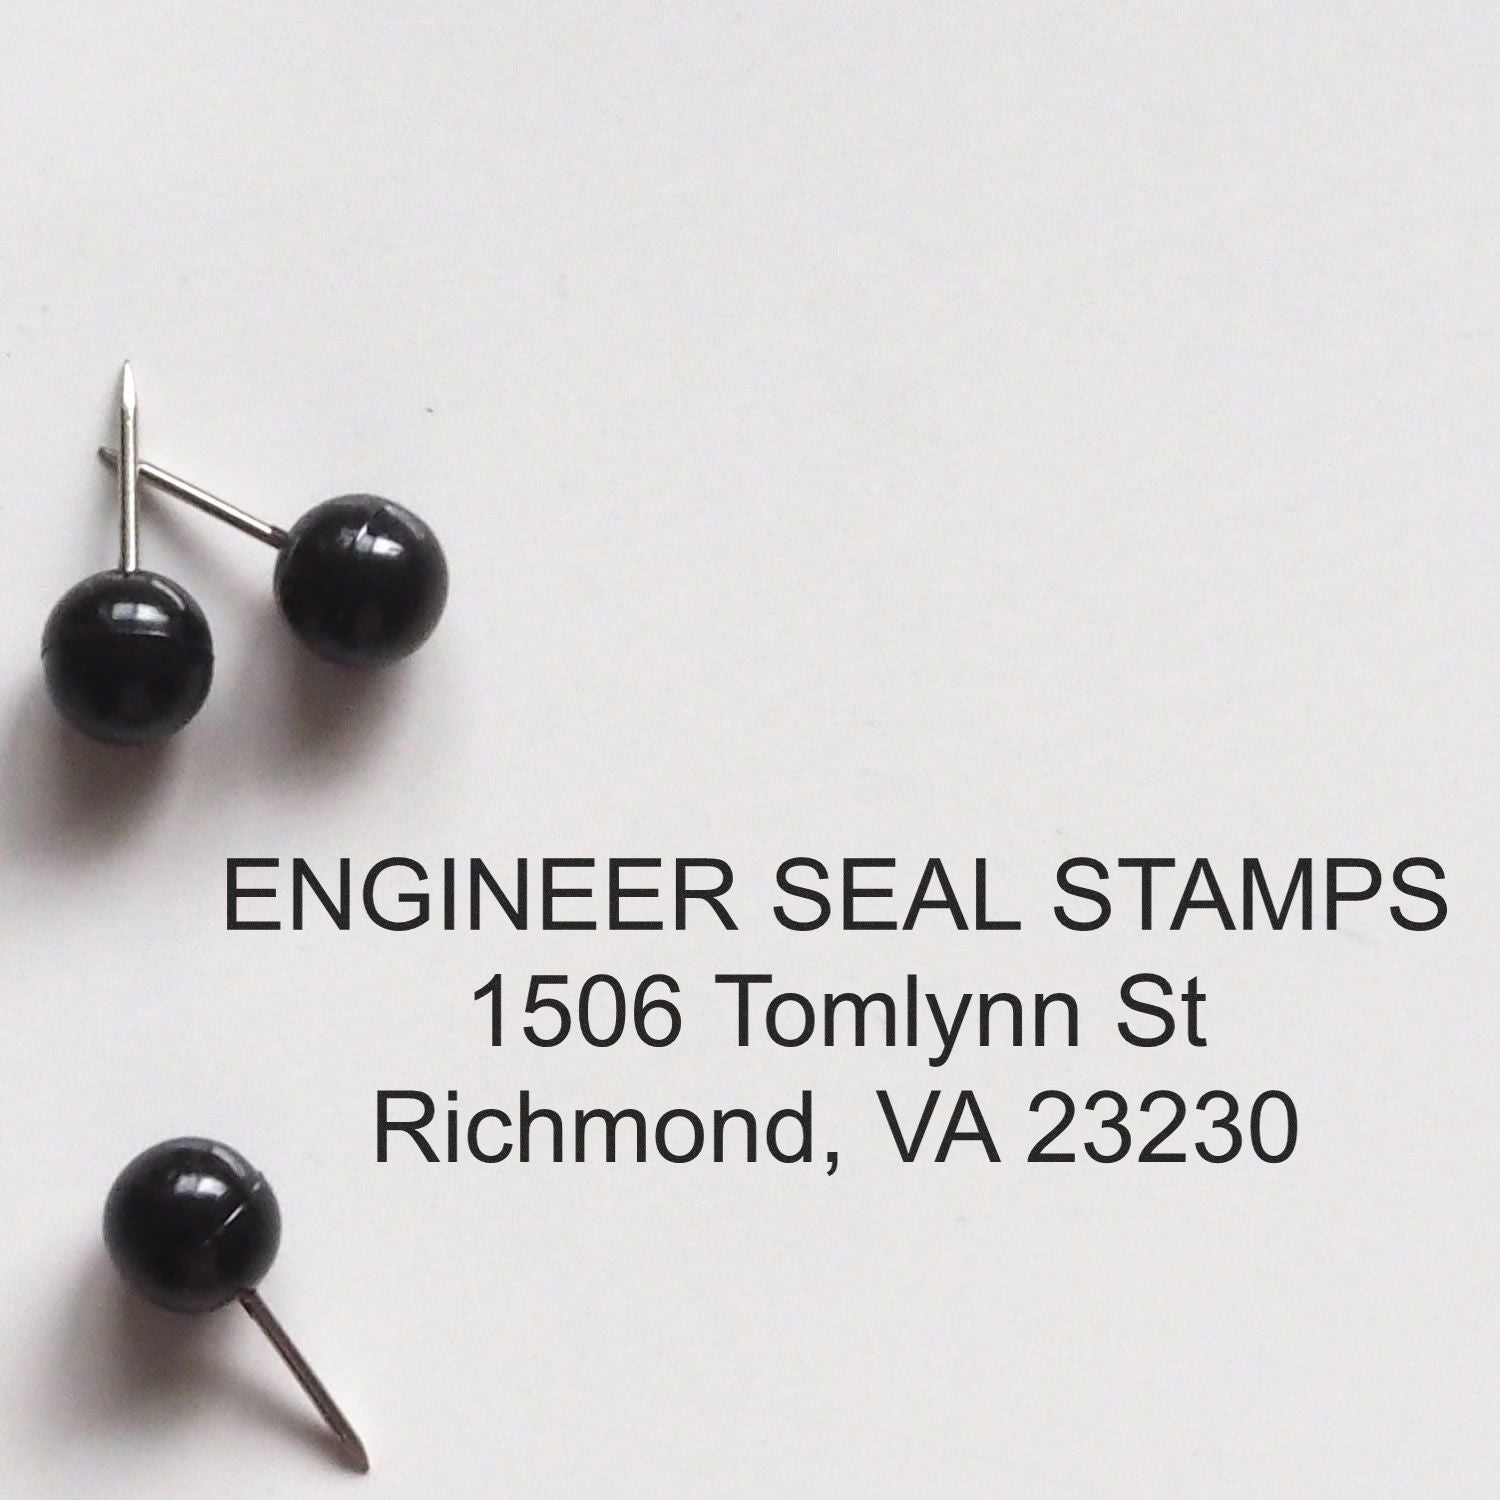 A custom rubber address stamp with a stamped image showing how any address (like the address of ESS displayed on the image) can be displayed after stamping from it.